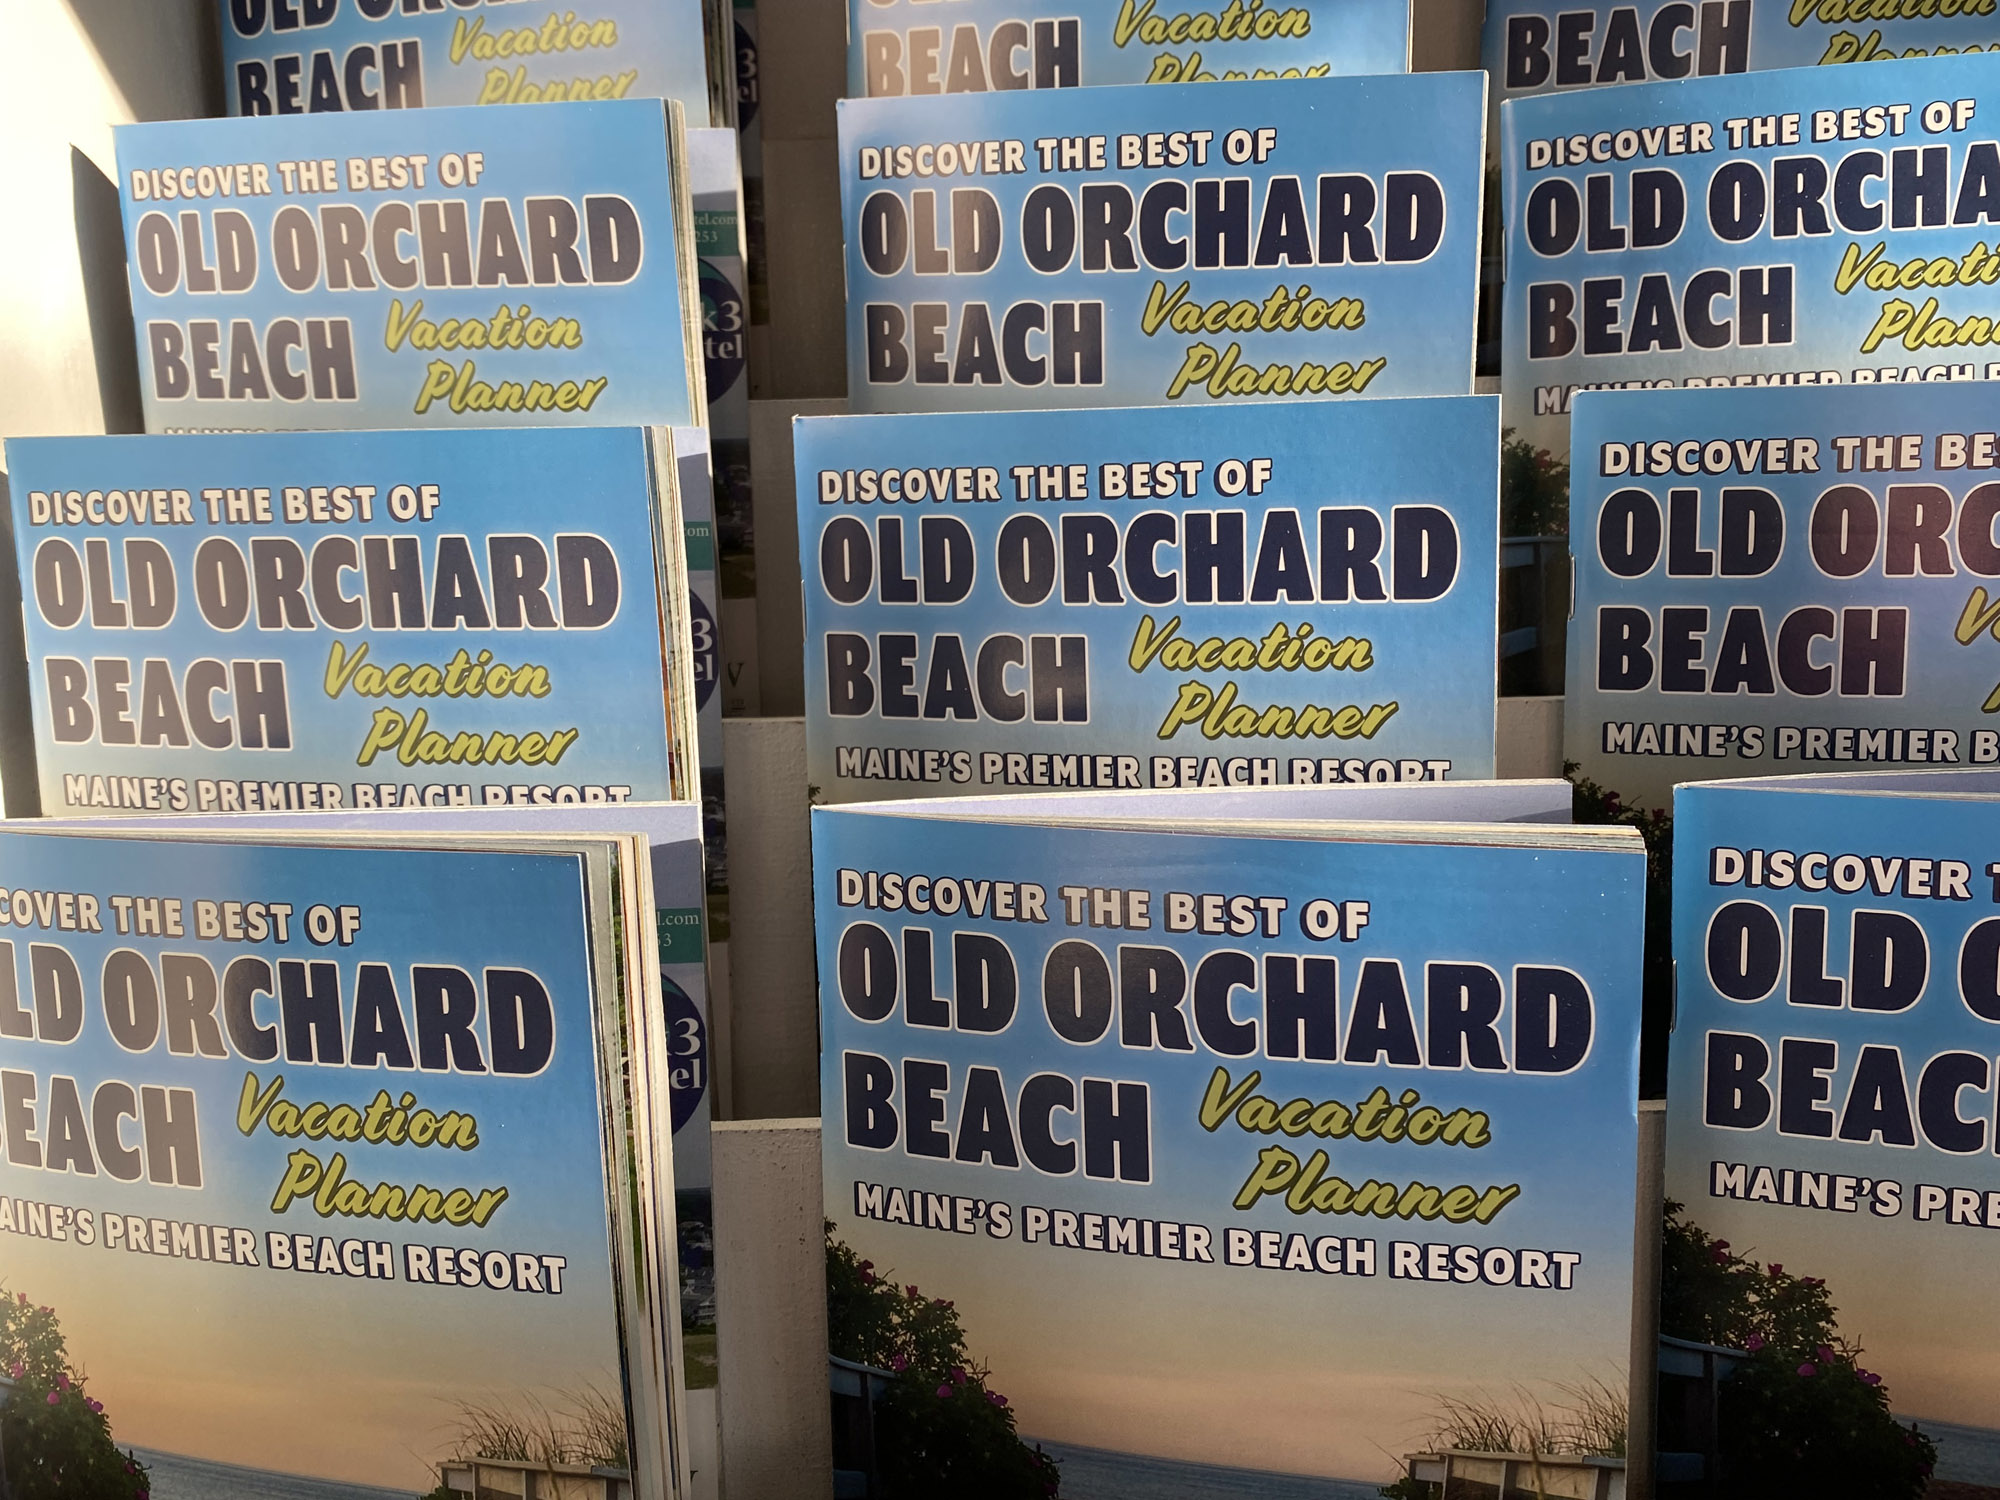 old orchard beach chamber of commerce vacation planner